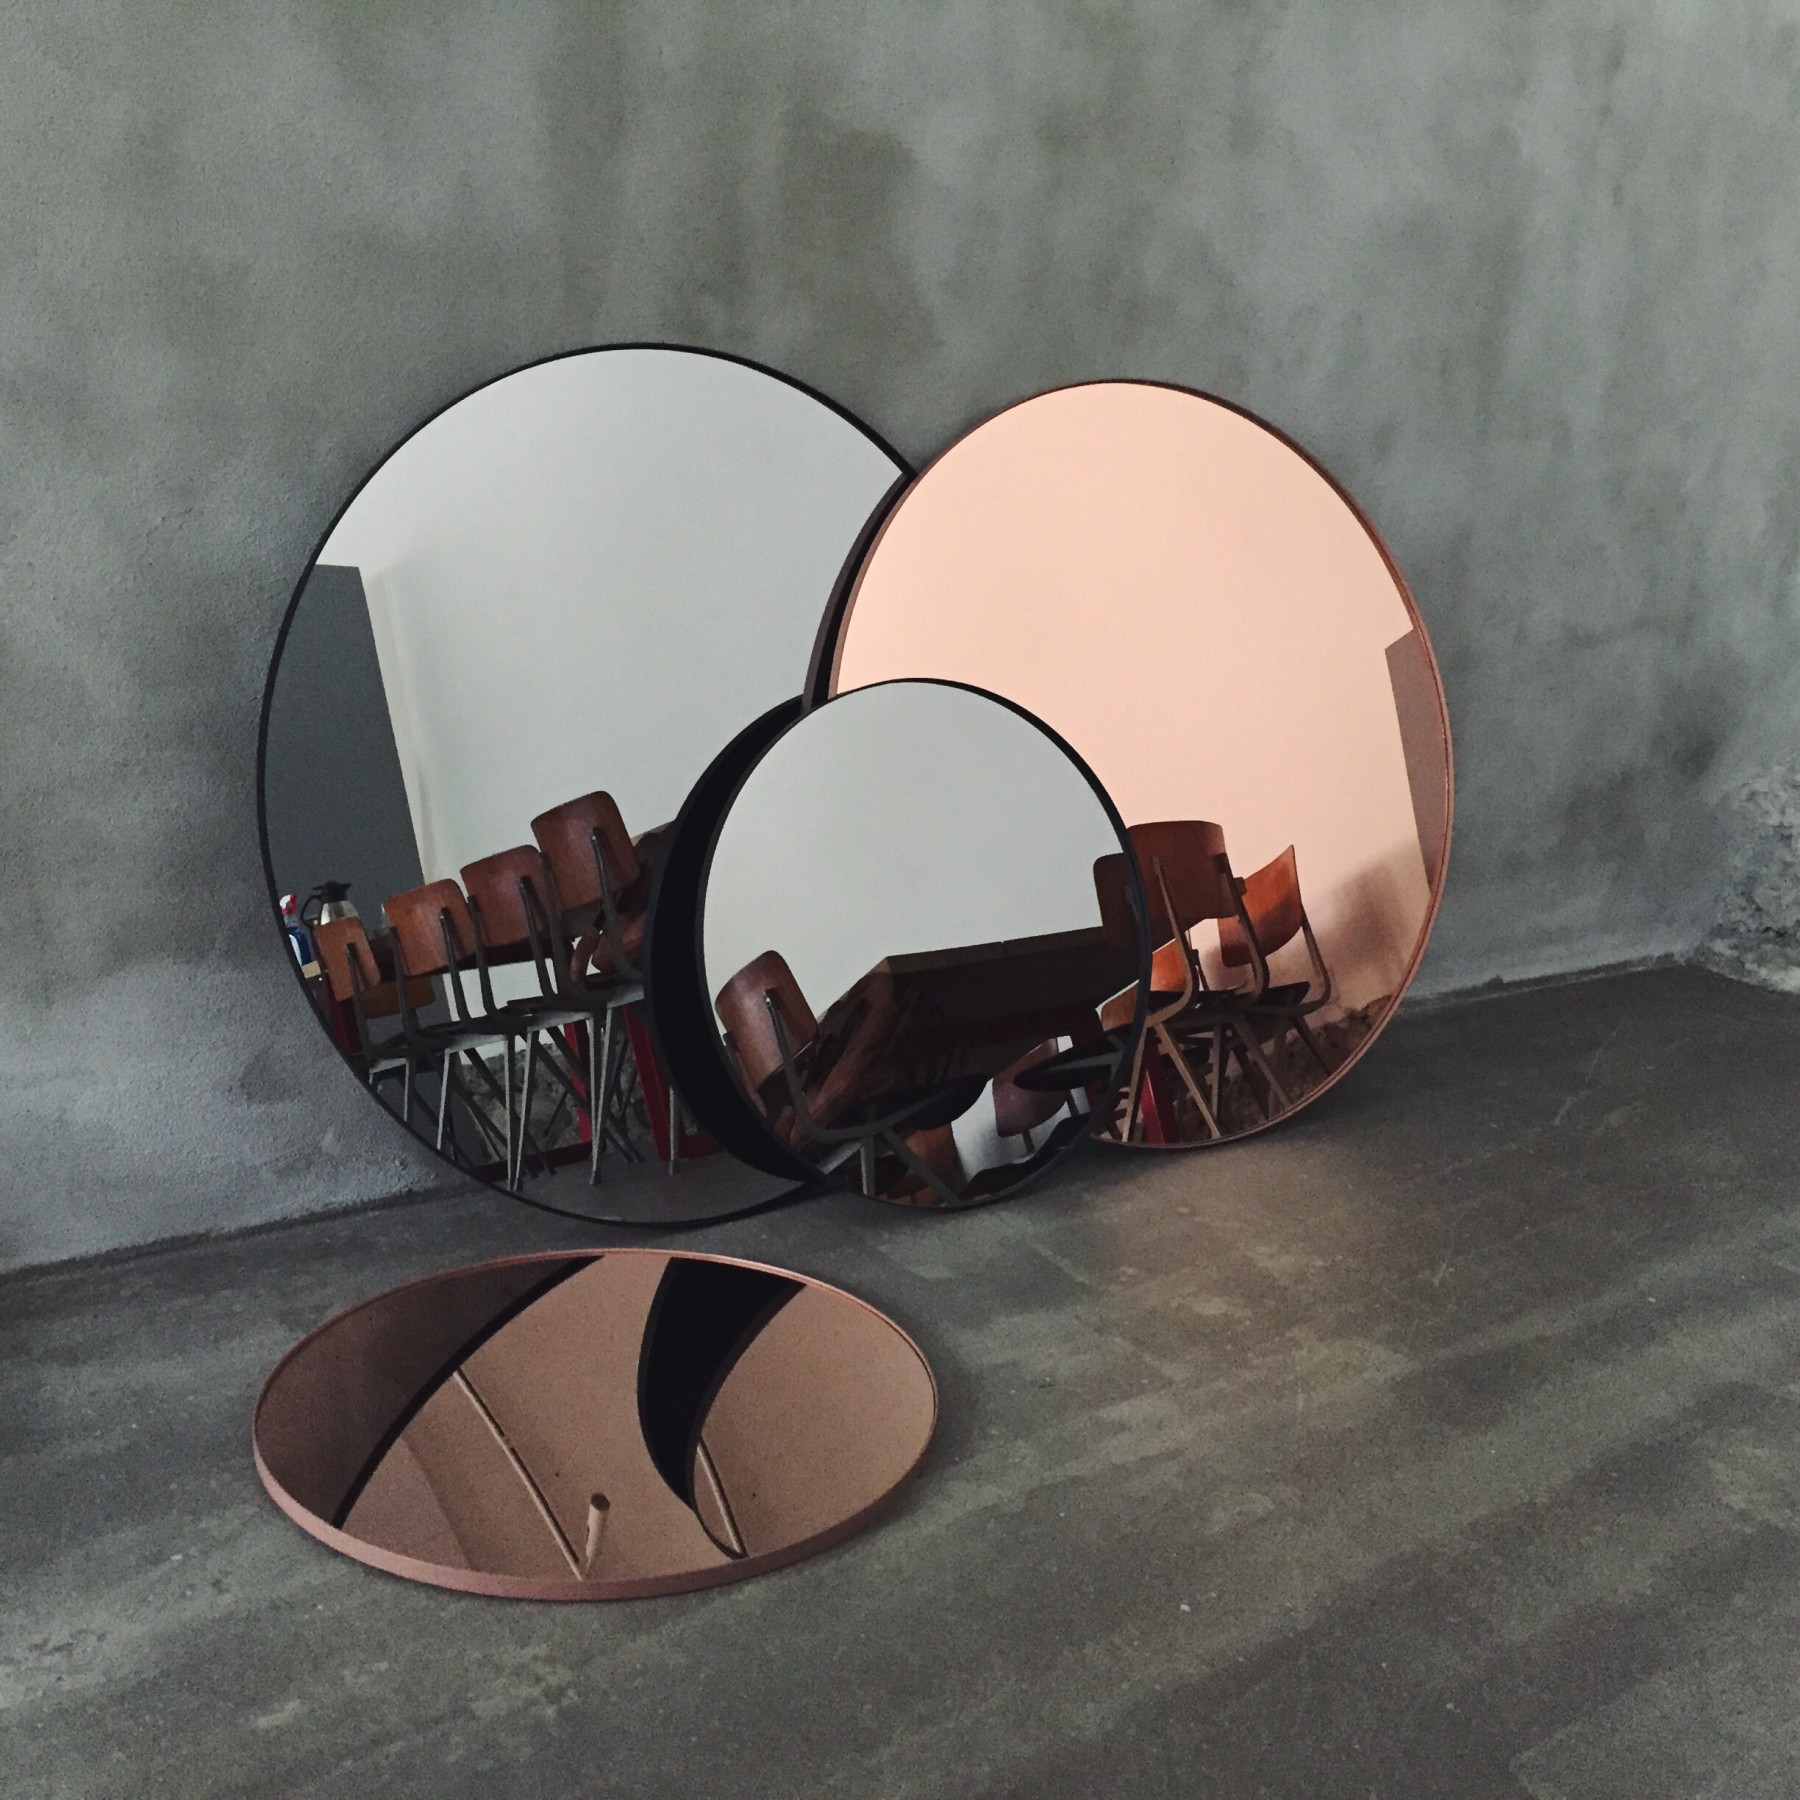 Mirror Decoration: Reflection Of Beauty